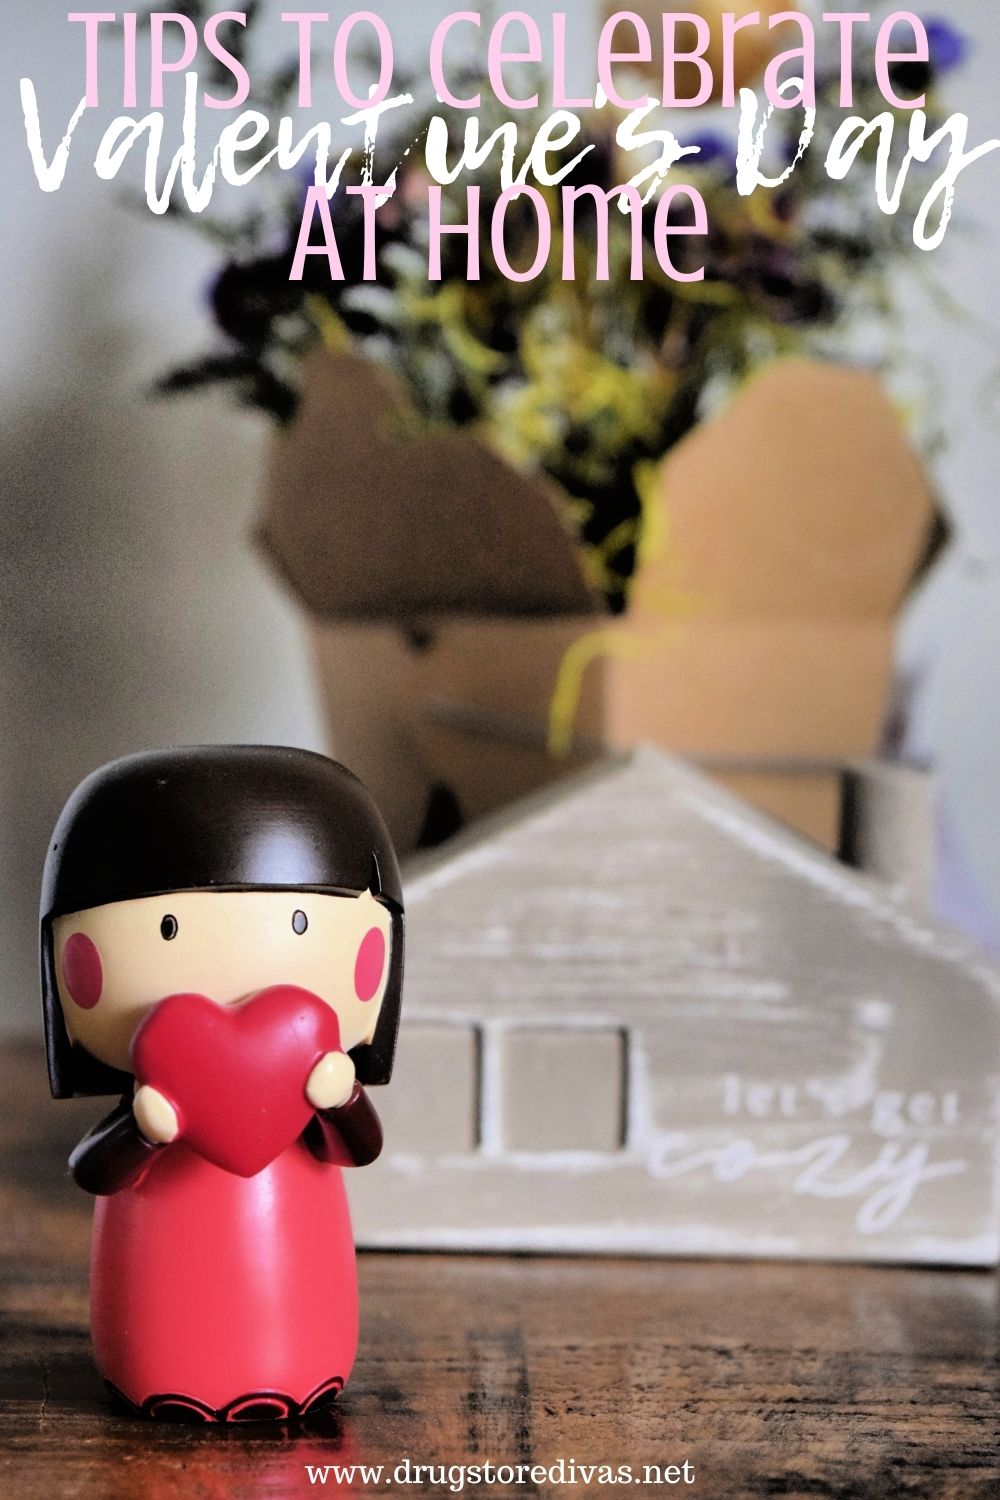 A wooden doll holding a heart, a wooden home that says let's get cozy, and flowers with the words 